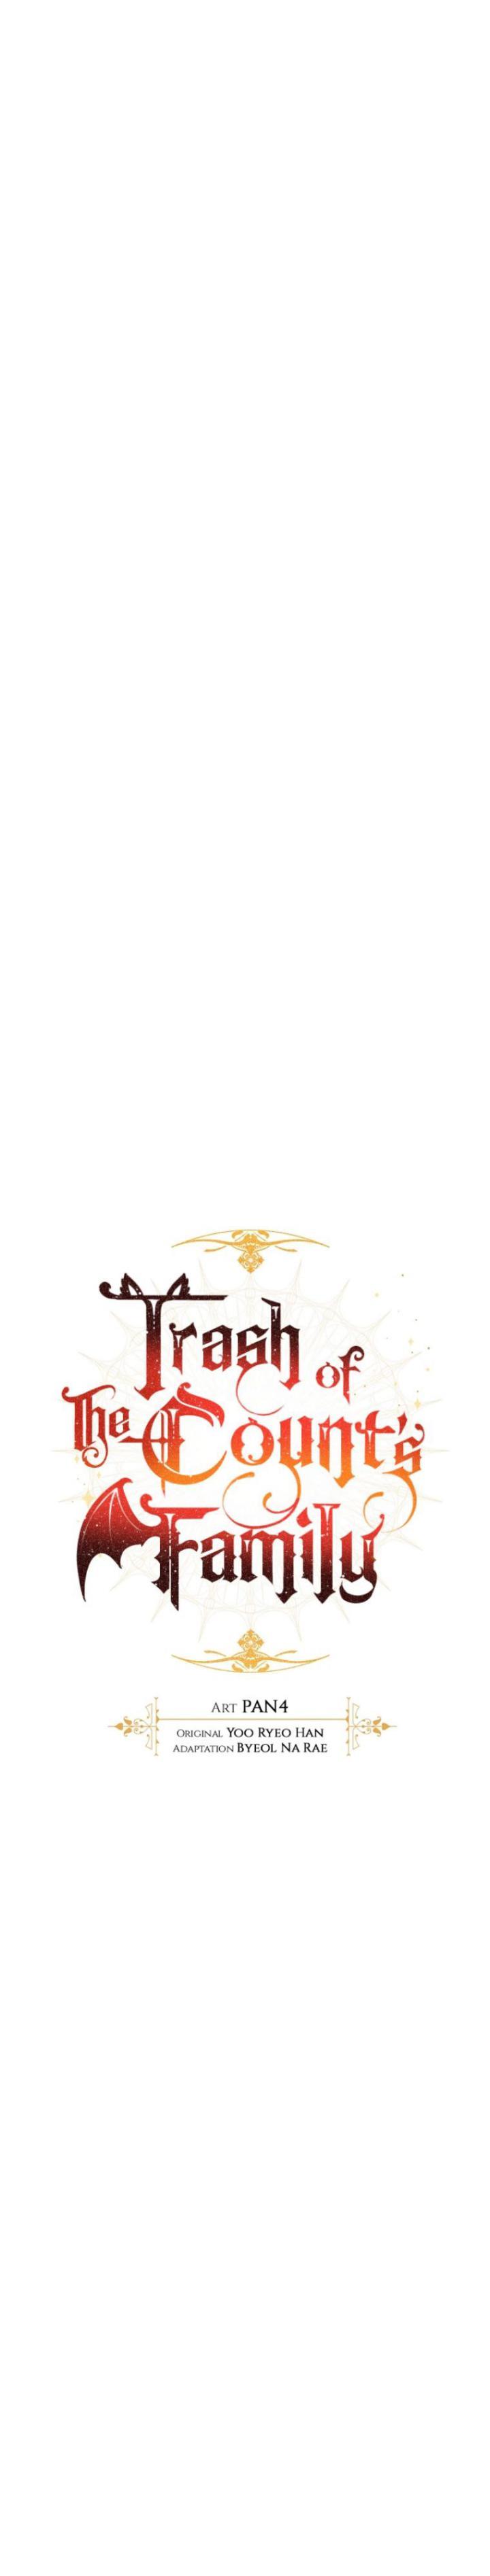 Trash of the Count’s Family Chapter 126